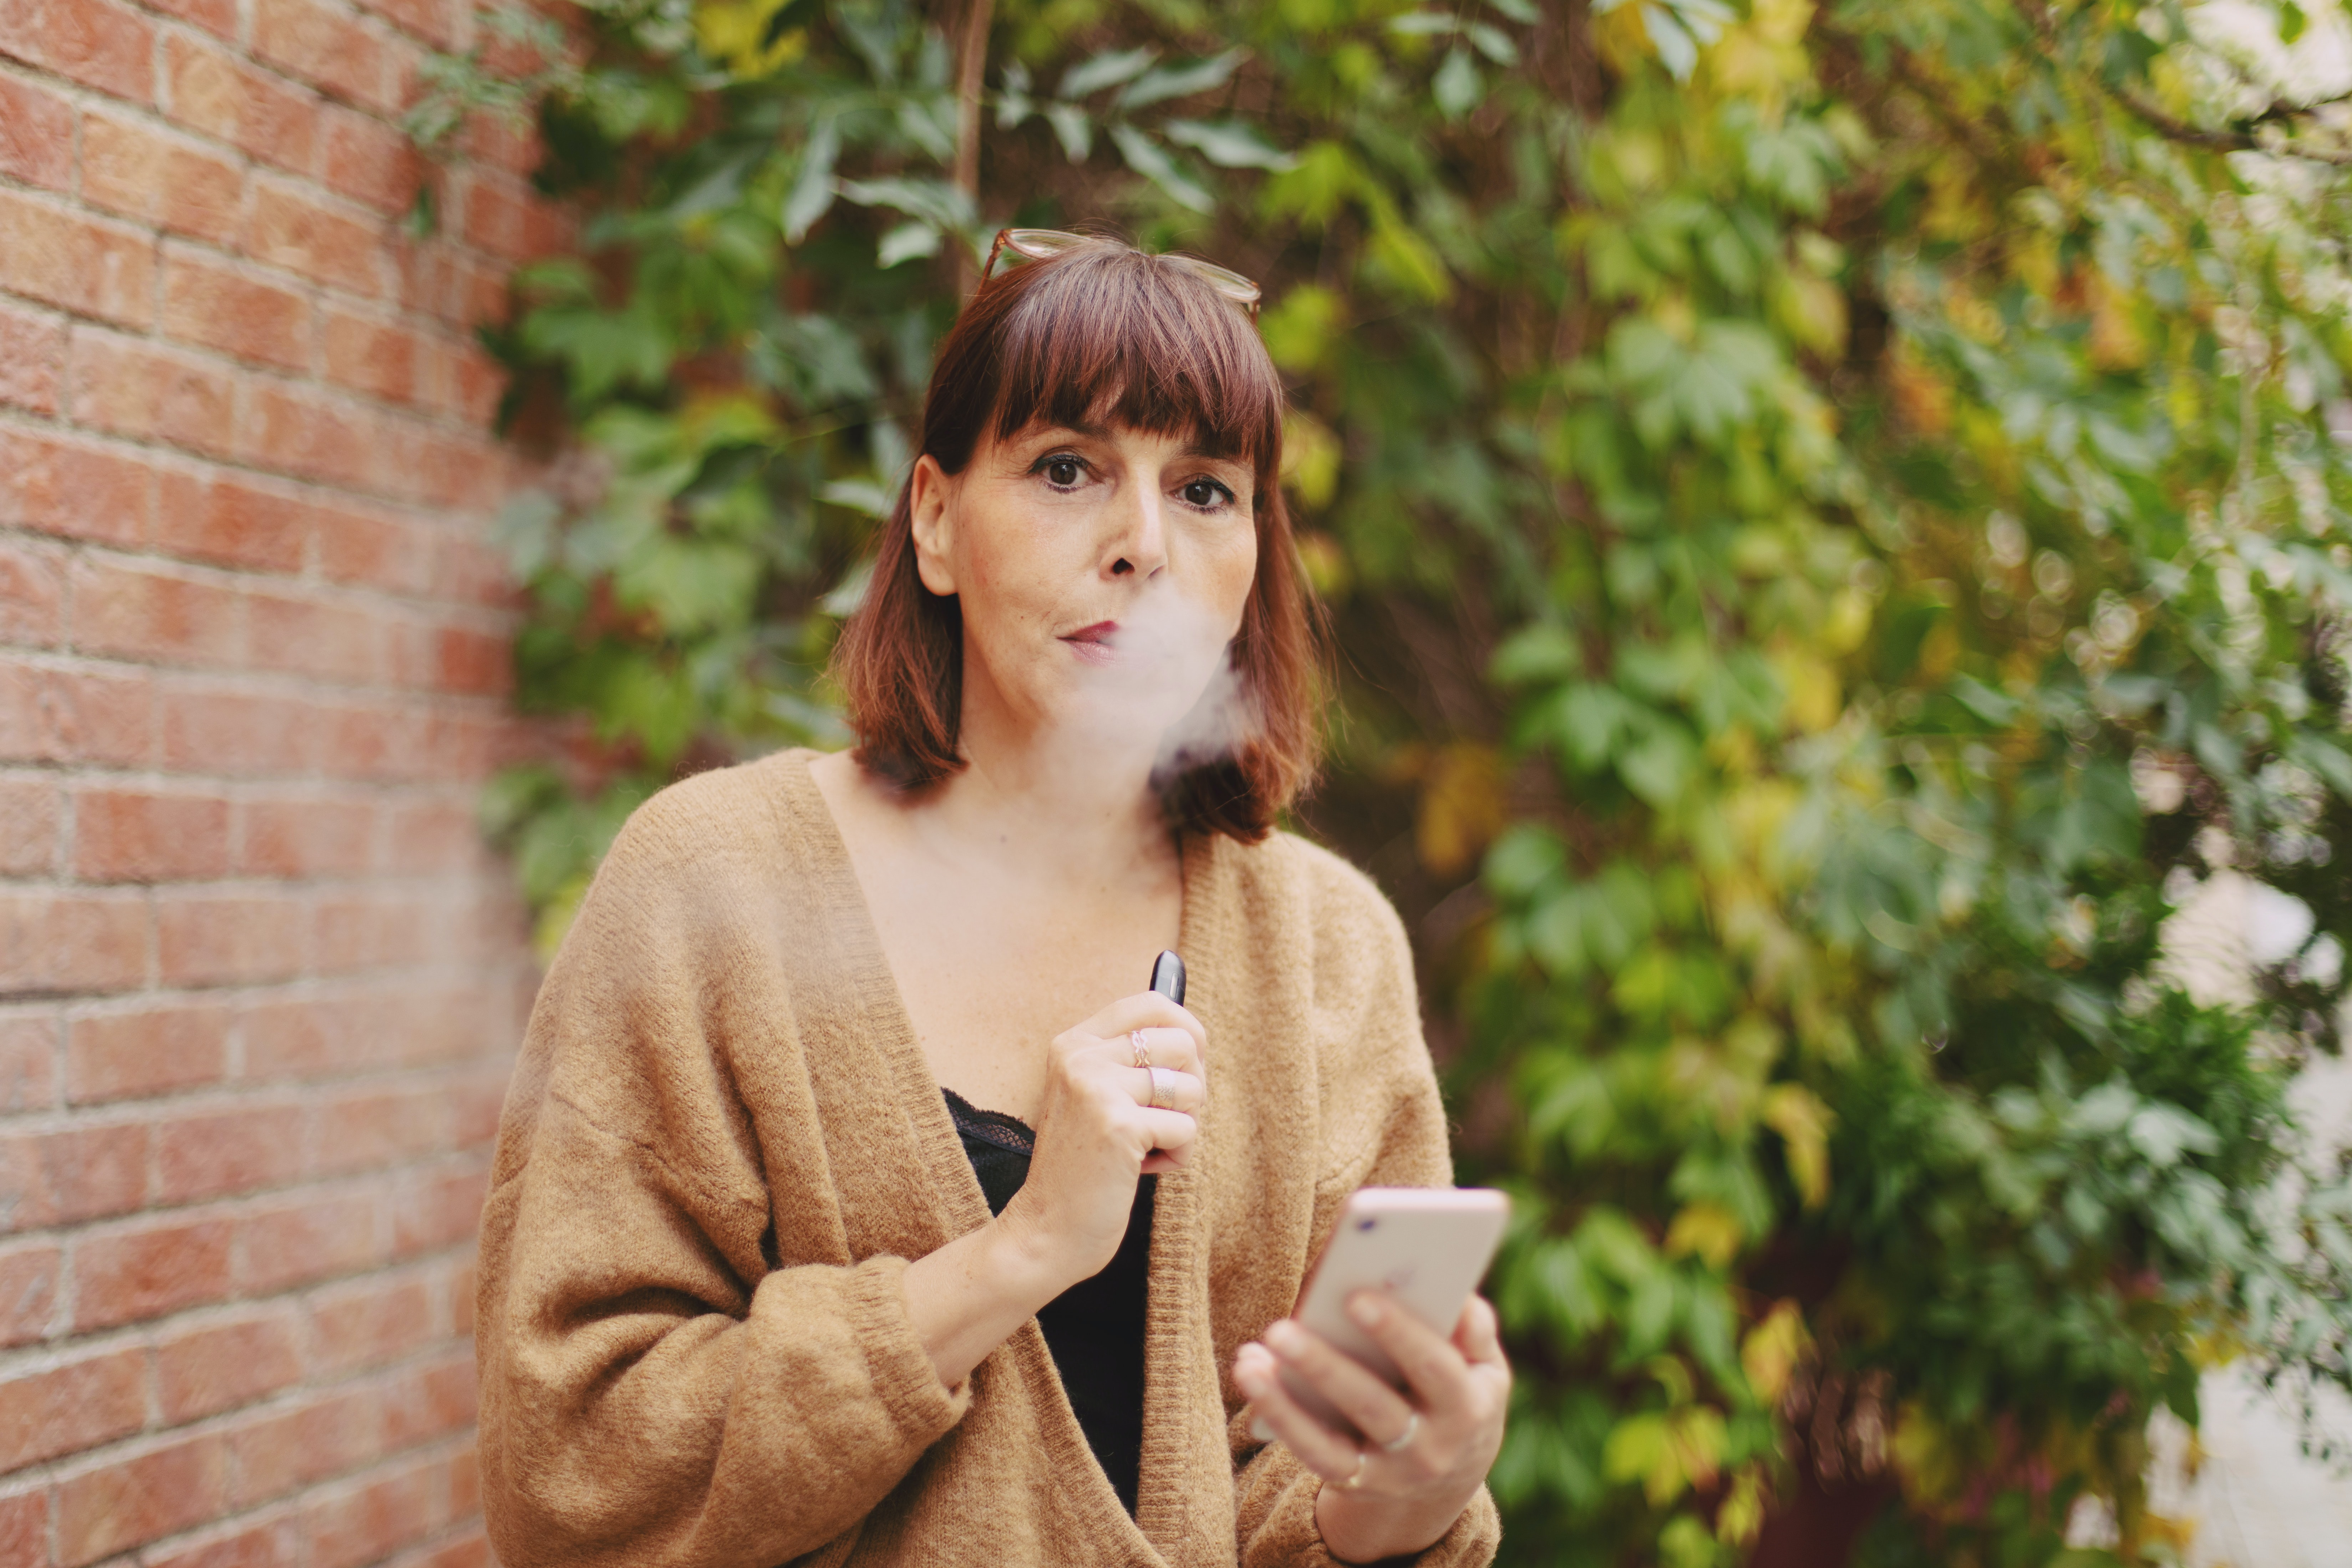 What is the difference between e-cigarettes and cigarettes?